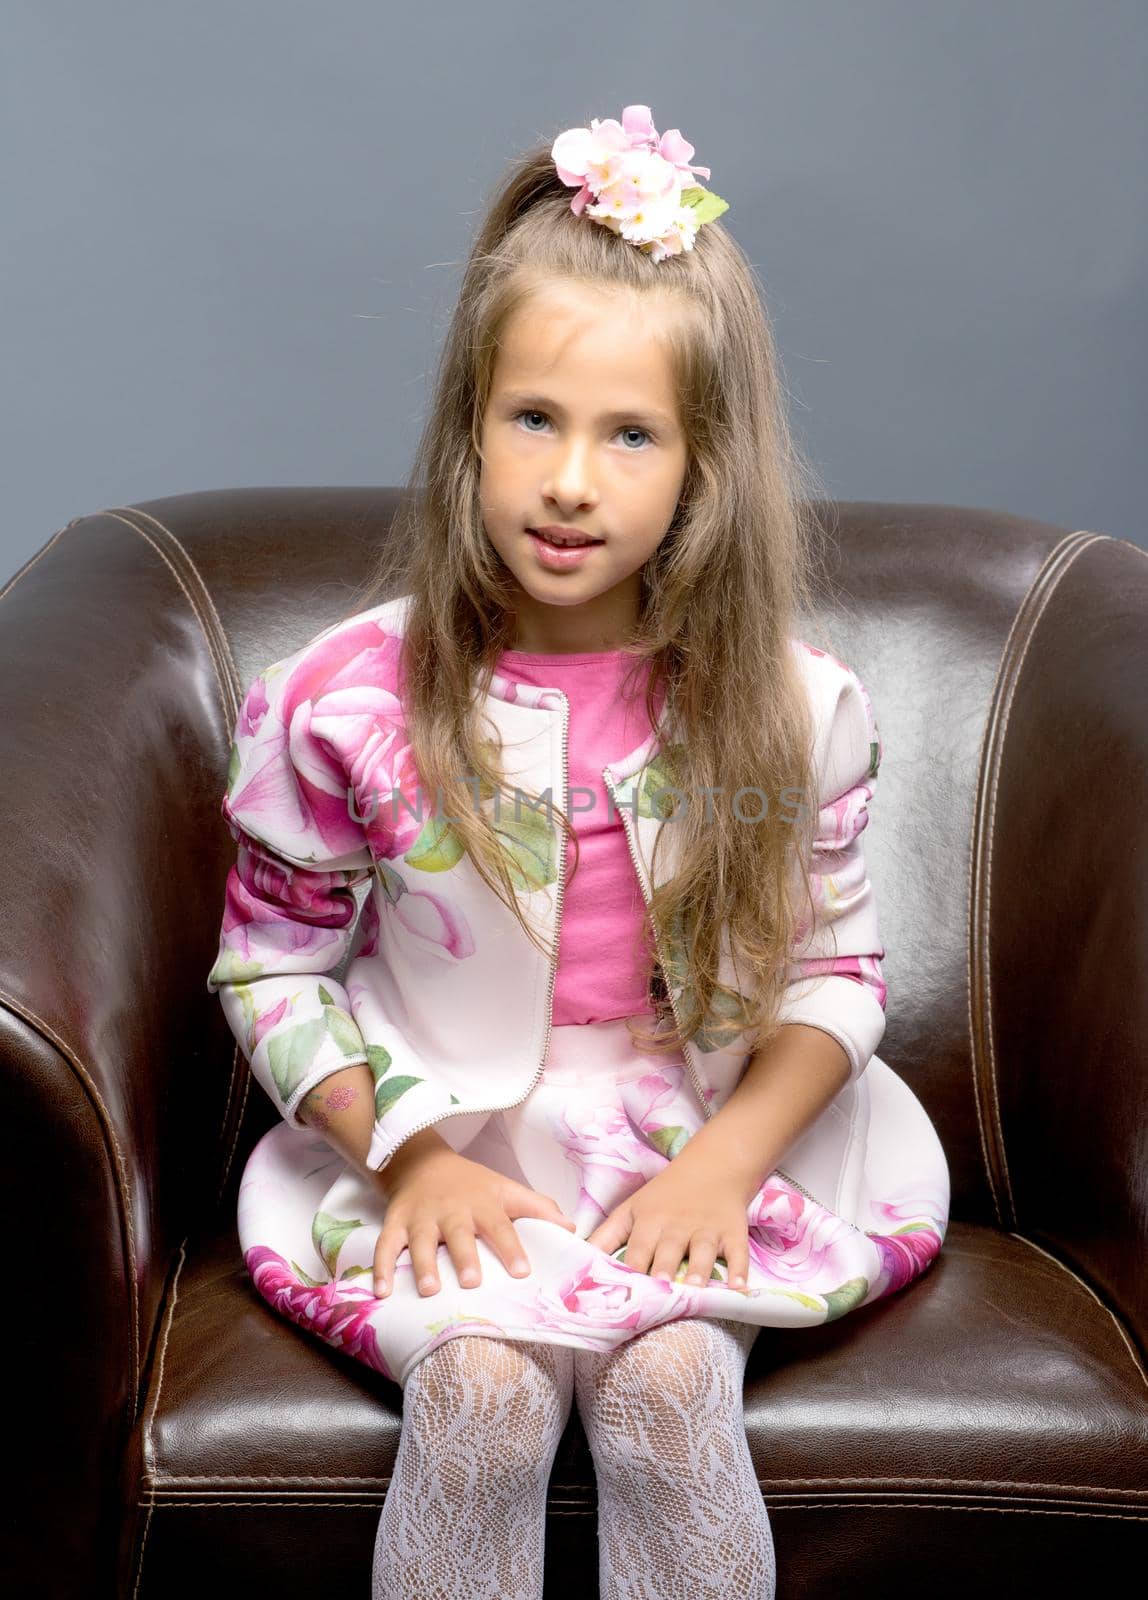 A little girl is sitting on a leather chair. by kolesnikov_studio